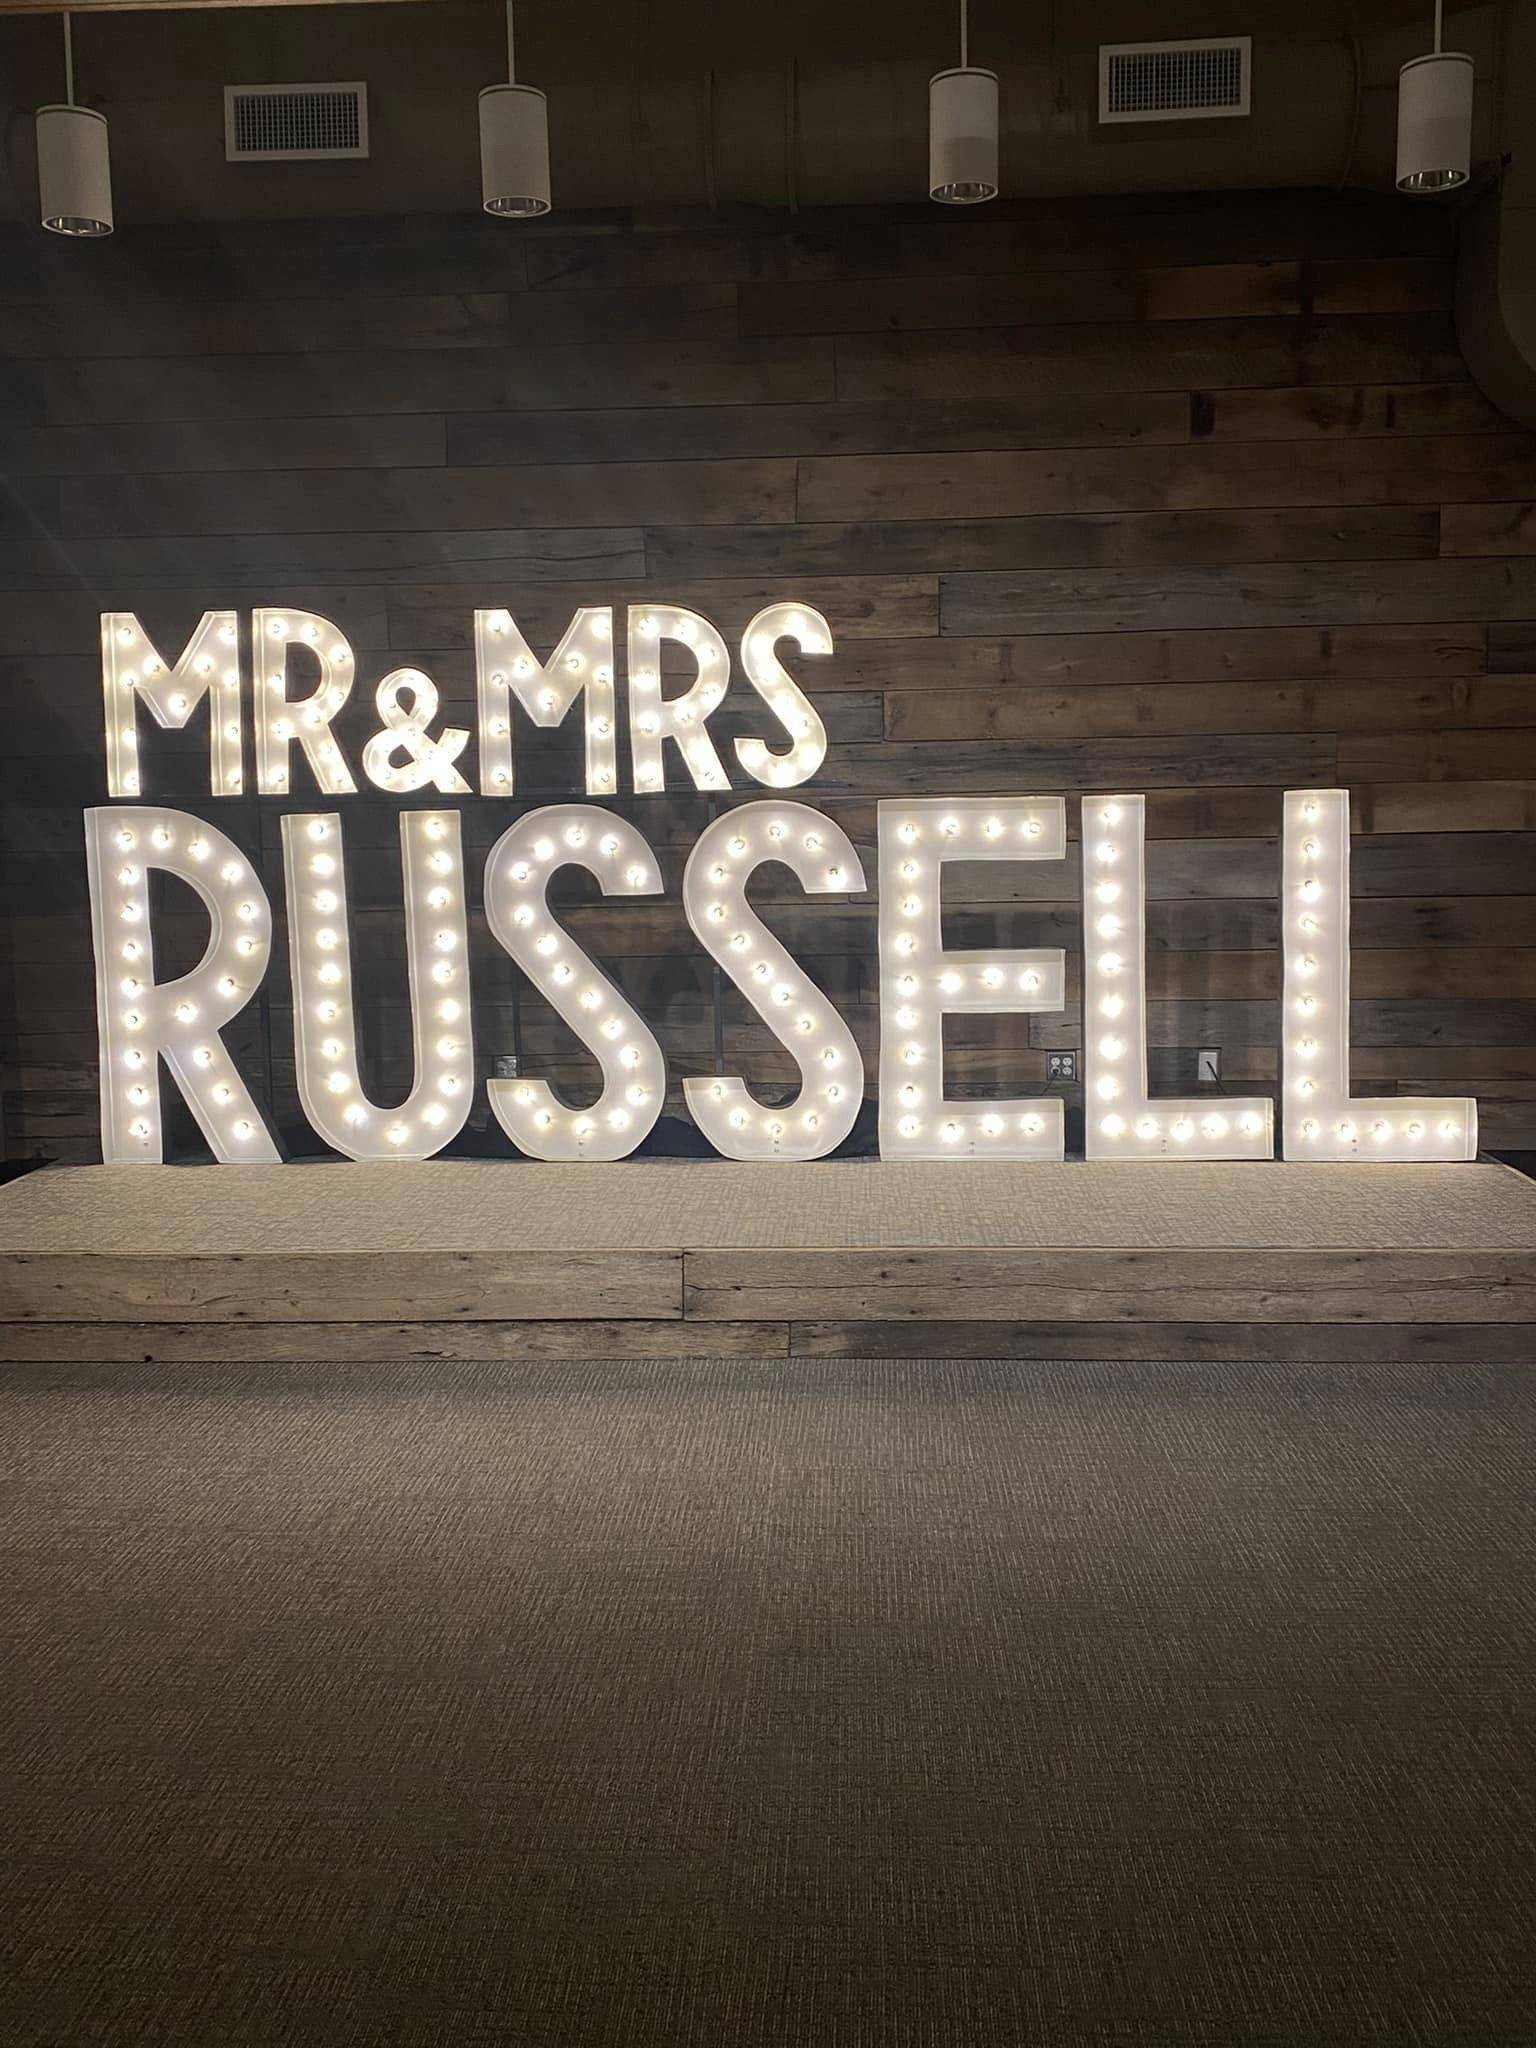 Huntsville Glow and Marquee Letters in North Alabama: All standard letters and numbers are an impressive 4' tall with classic toppers such as "THE" and "MR&MRS" that stand 2' tall.